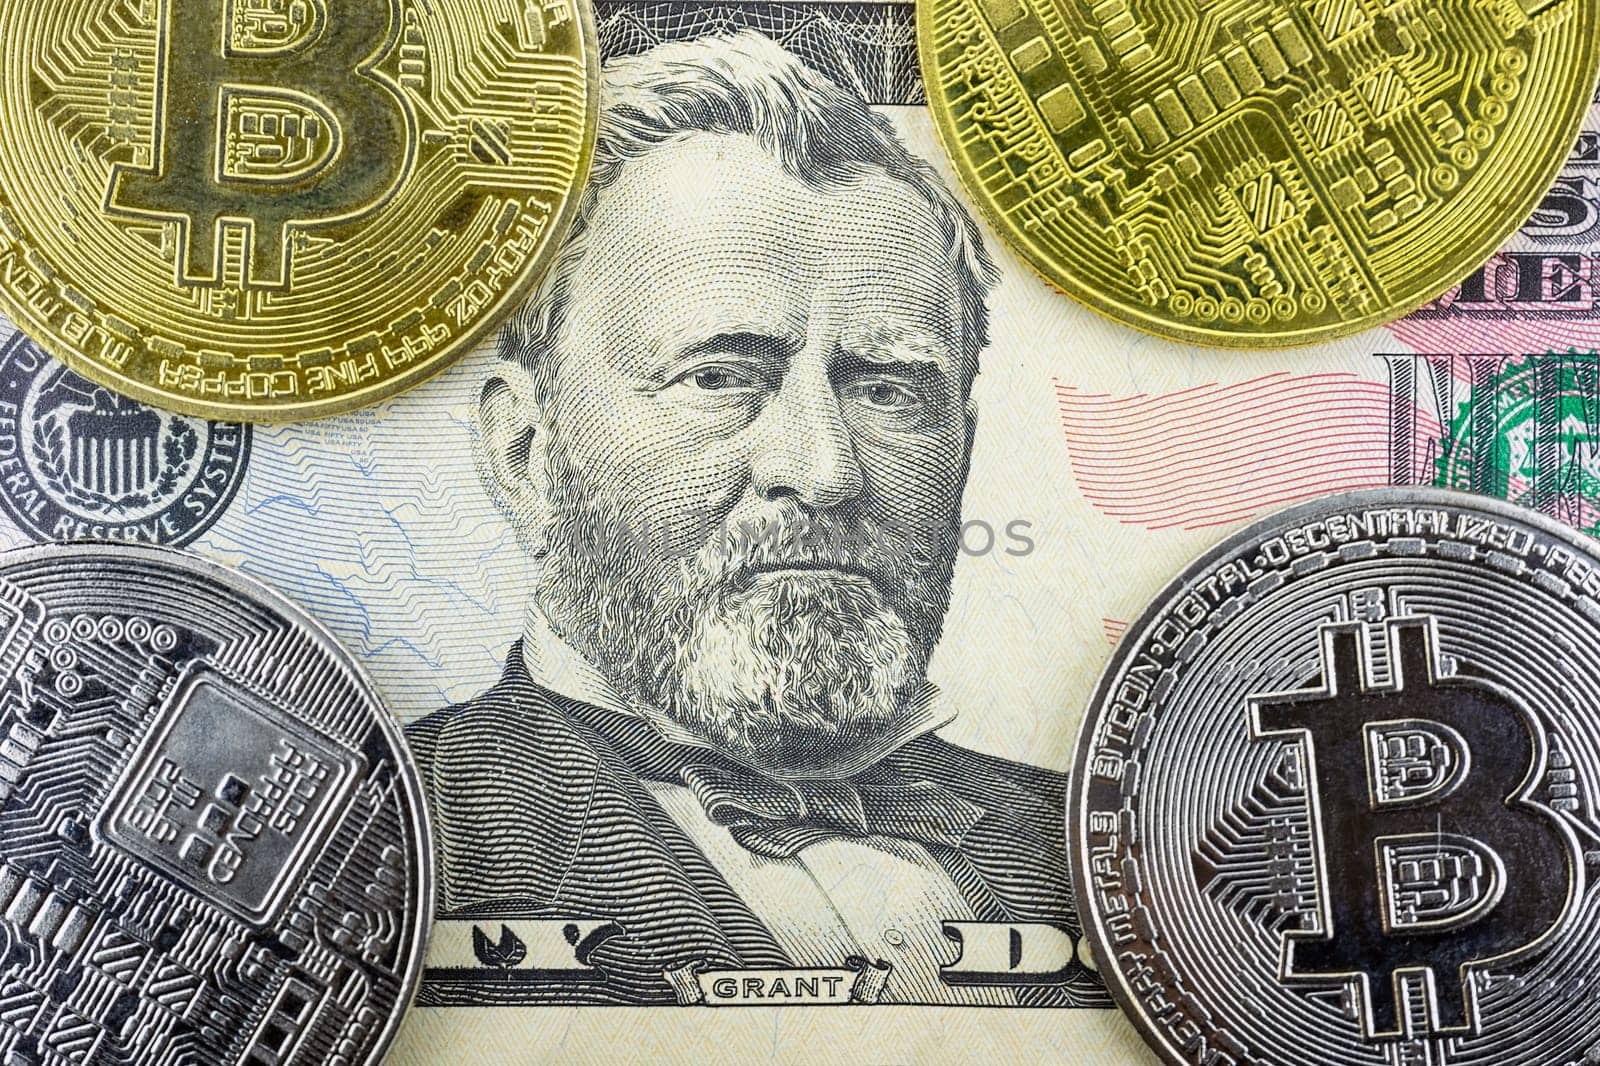 Bitcoin coins lie on a fifty dollar bill by zokov